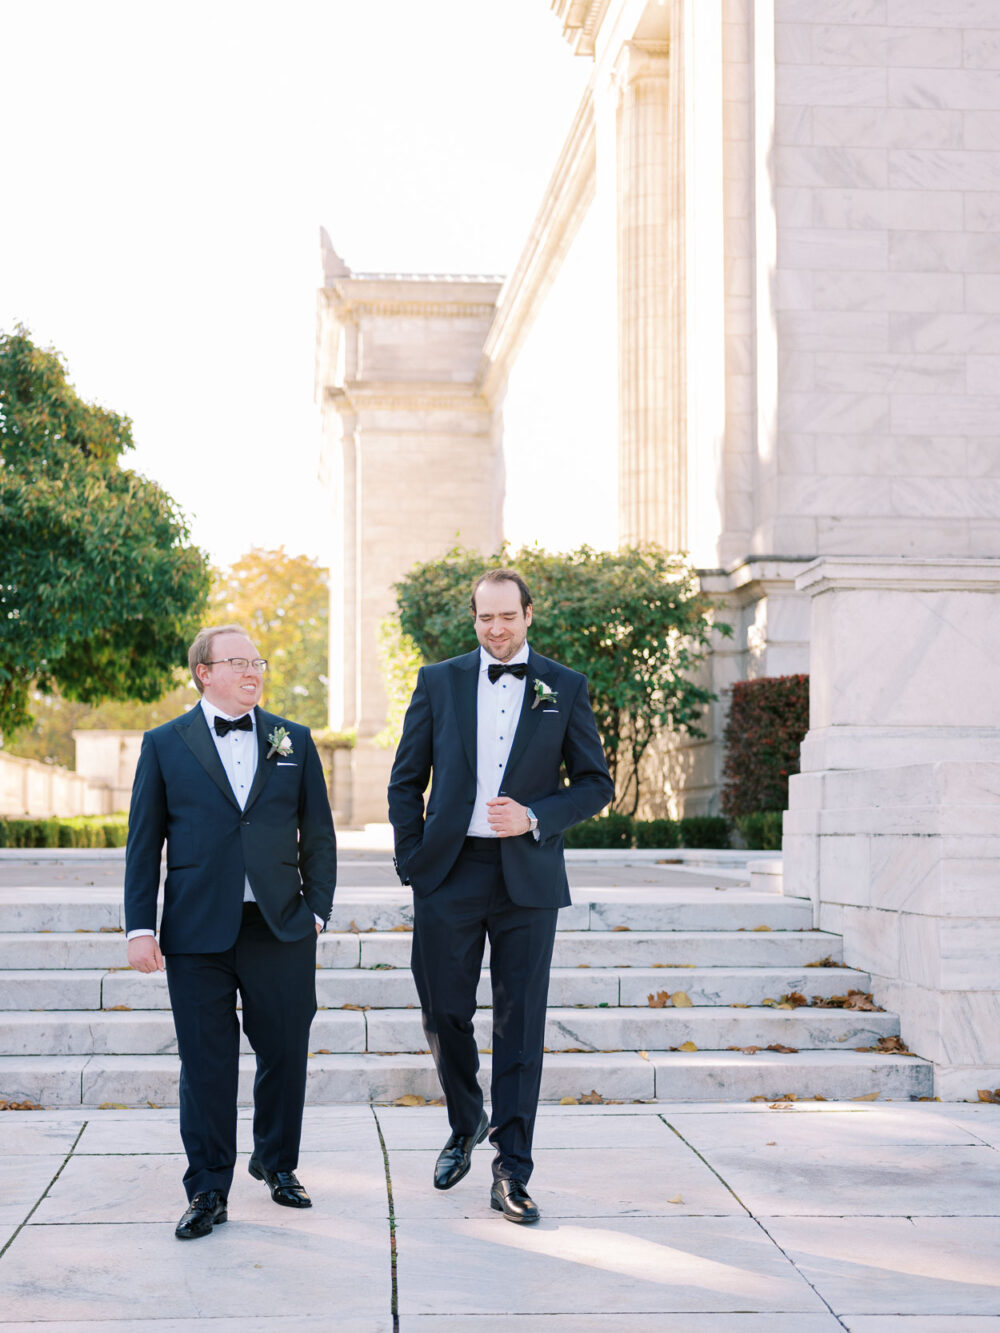 Groom with his groomsman during portraits at Cleveland Art Museum 